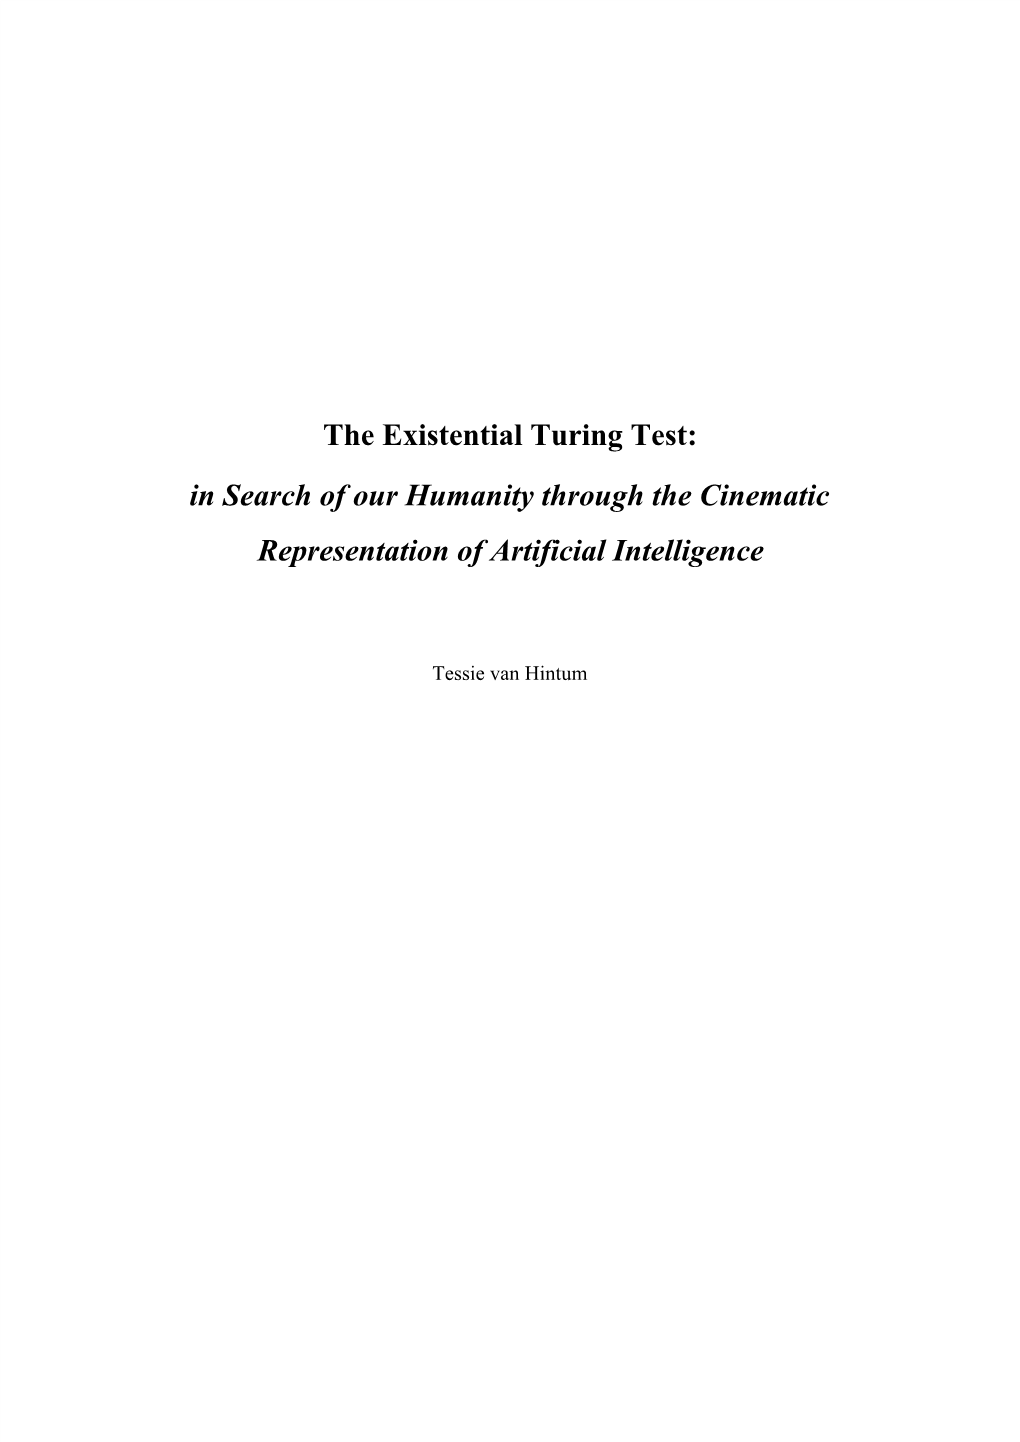 The Existential Turing Test: in Search of Our Humanity Through the Cinematic Representation of Artificial Intelligence